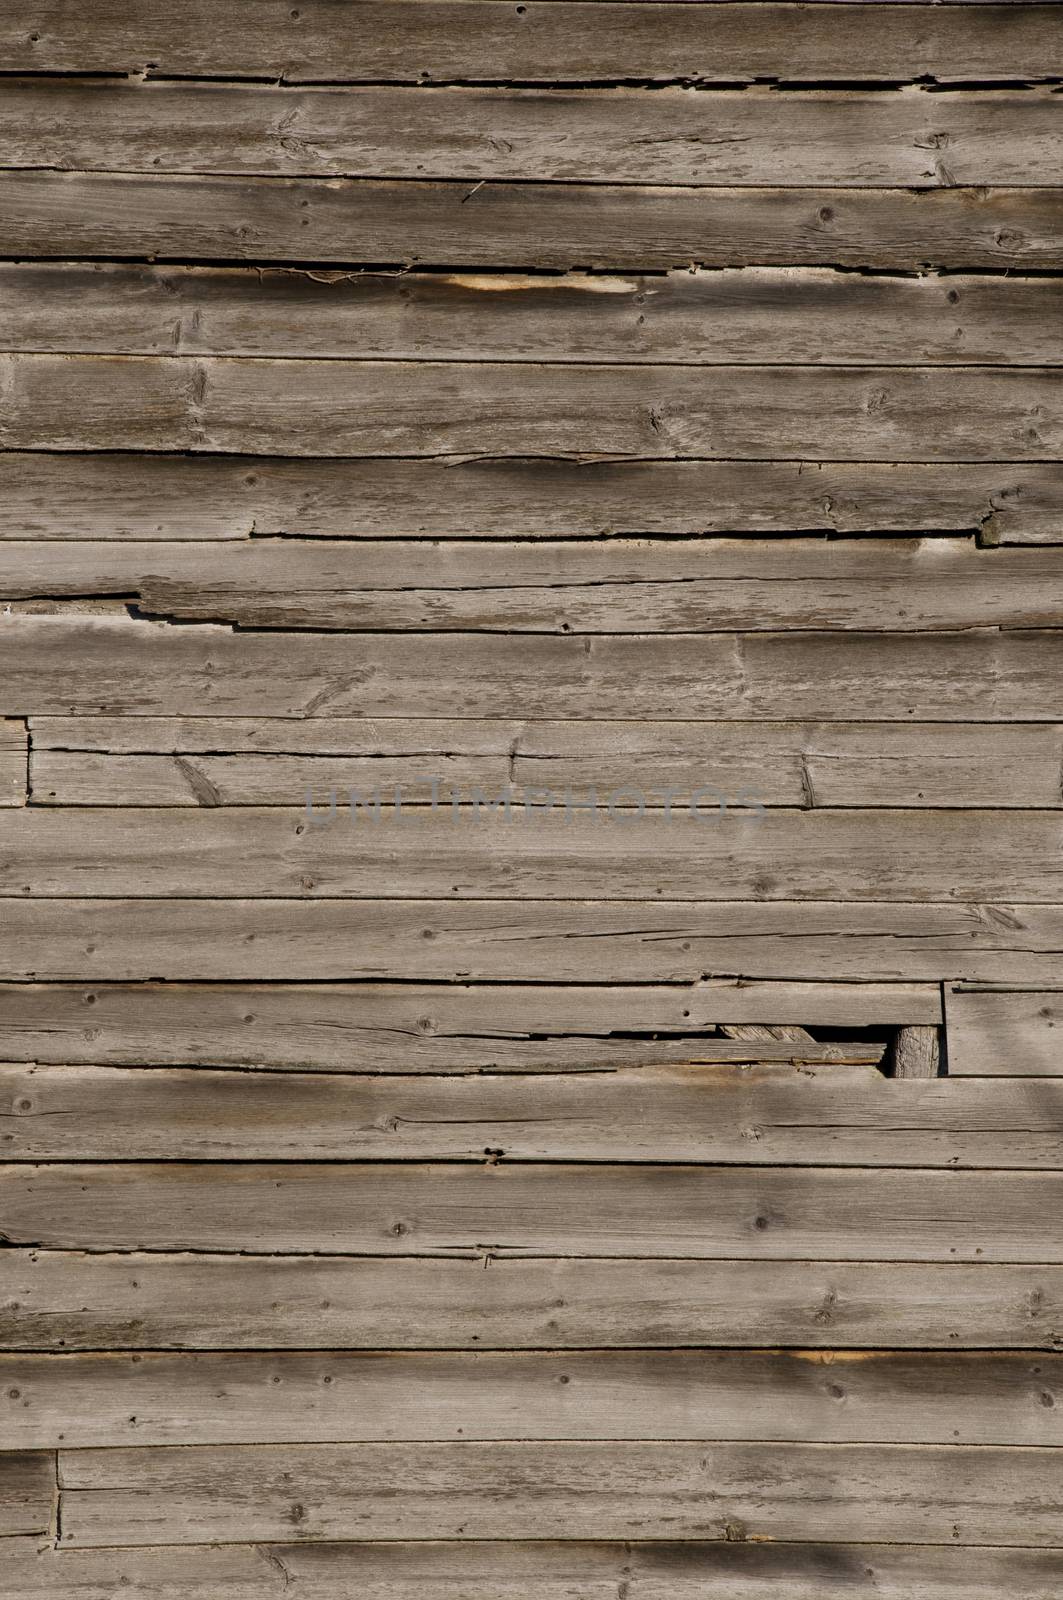 Weathered wooden wall with unpainted planks by Balefire9